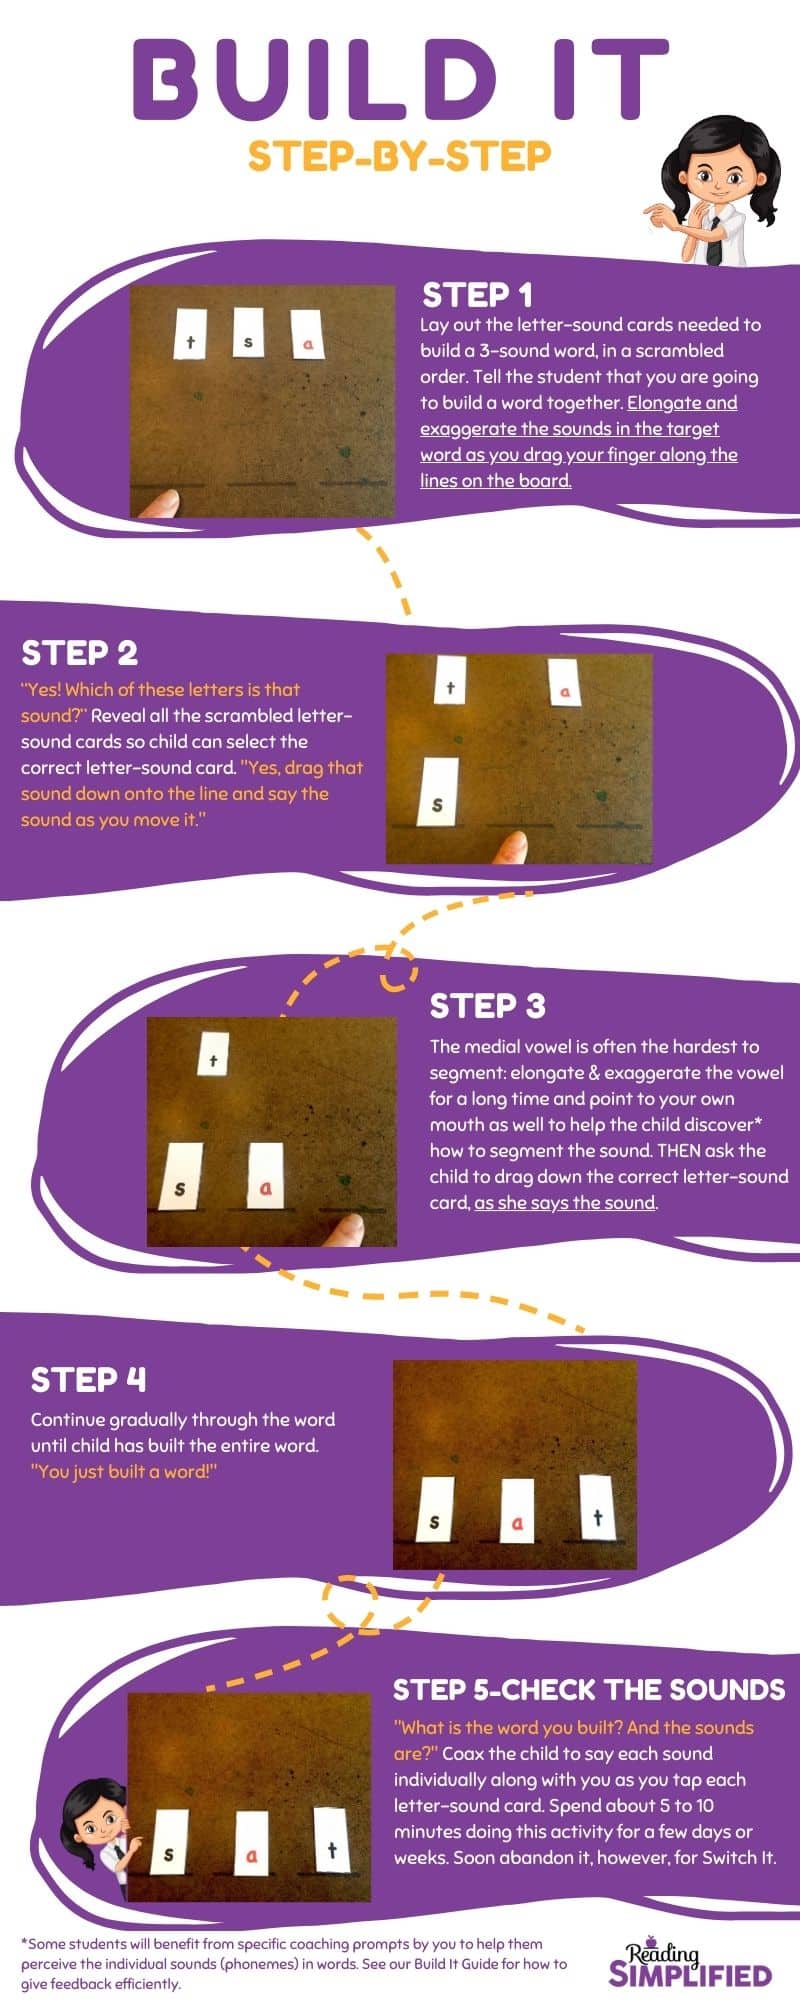 Build It Step by Step infographic